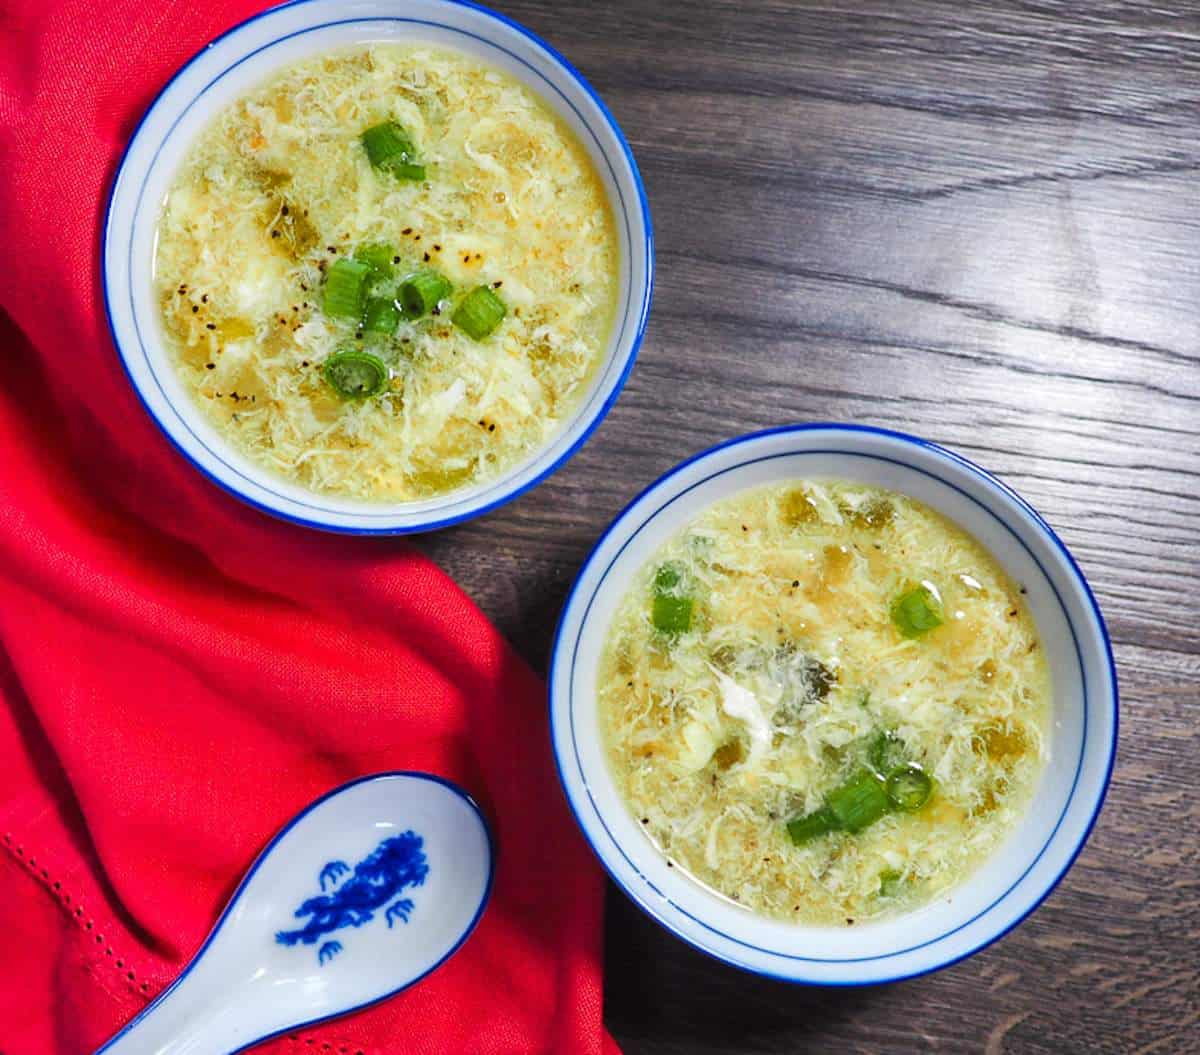 Two small blue and white bowls of homemade egg drop soup topped with sliced green onions.